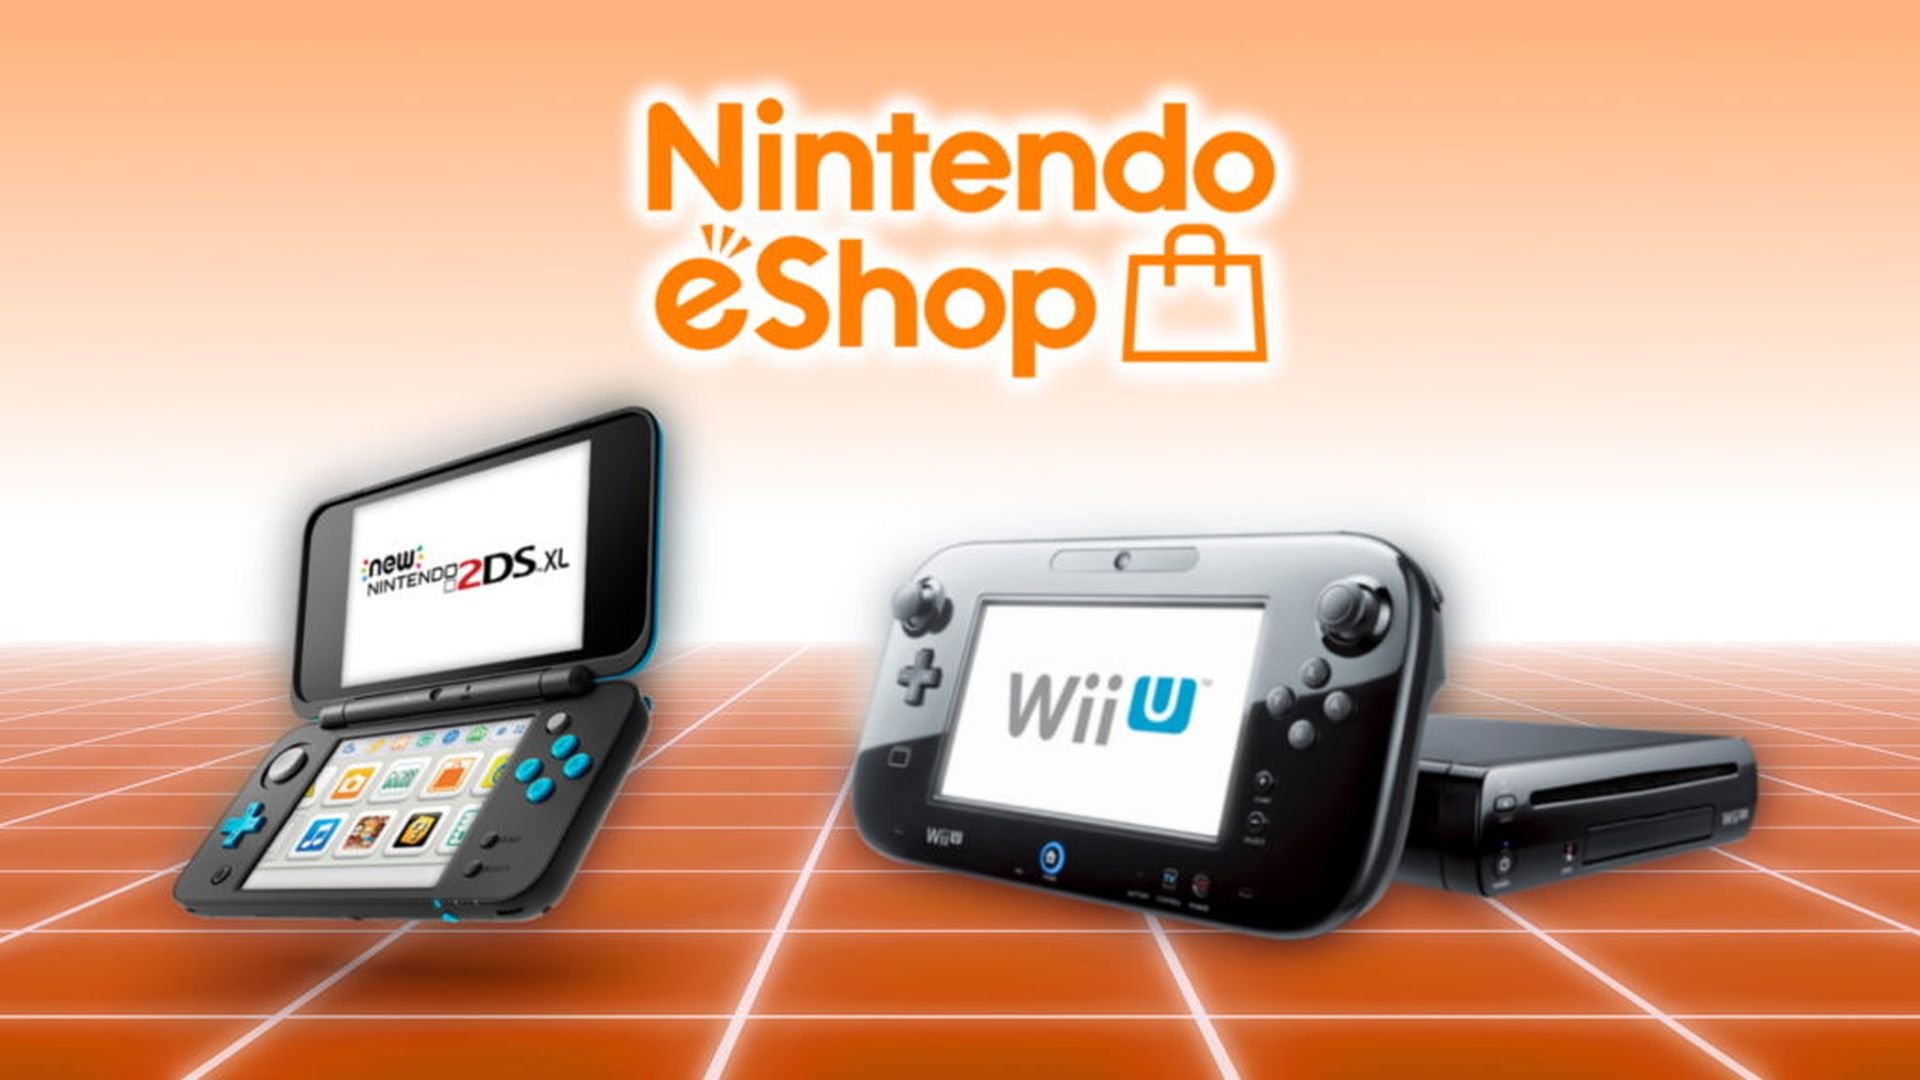 Nintendo: We're shutting down the Wii U and 3DS Eshop. Also